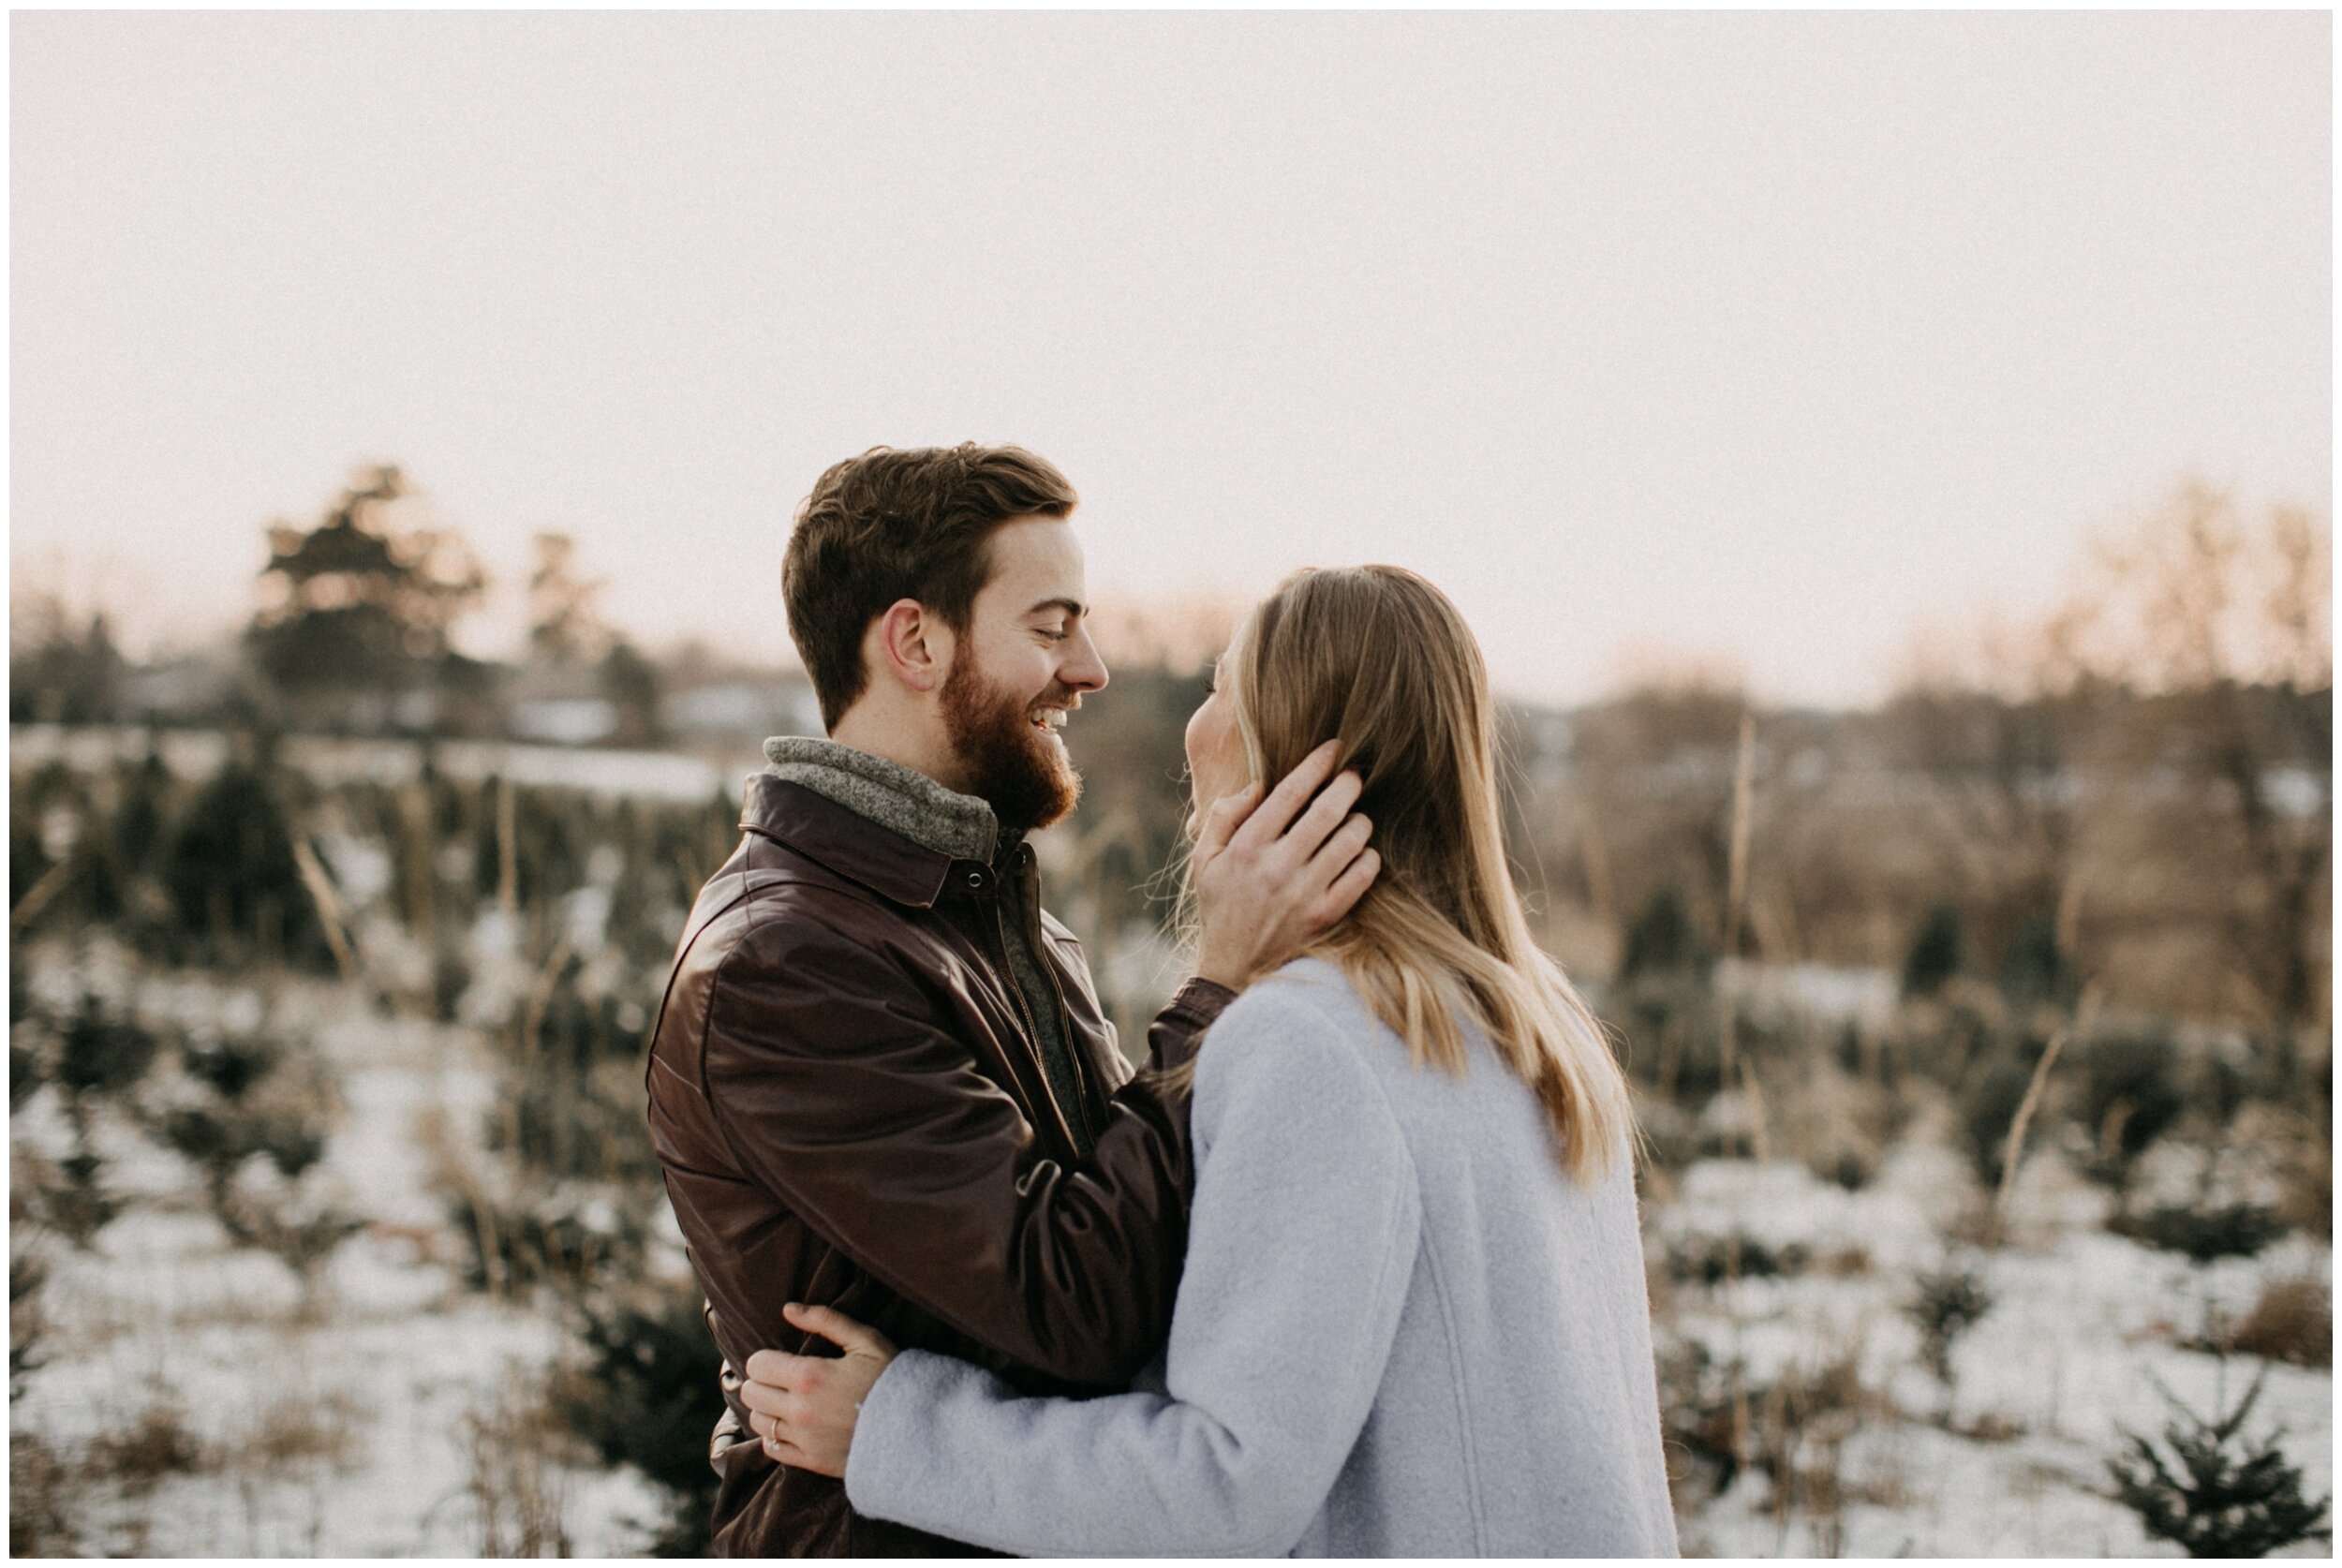 Couple laughing during engagement session at Minnesota Christmas tree farm